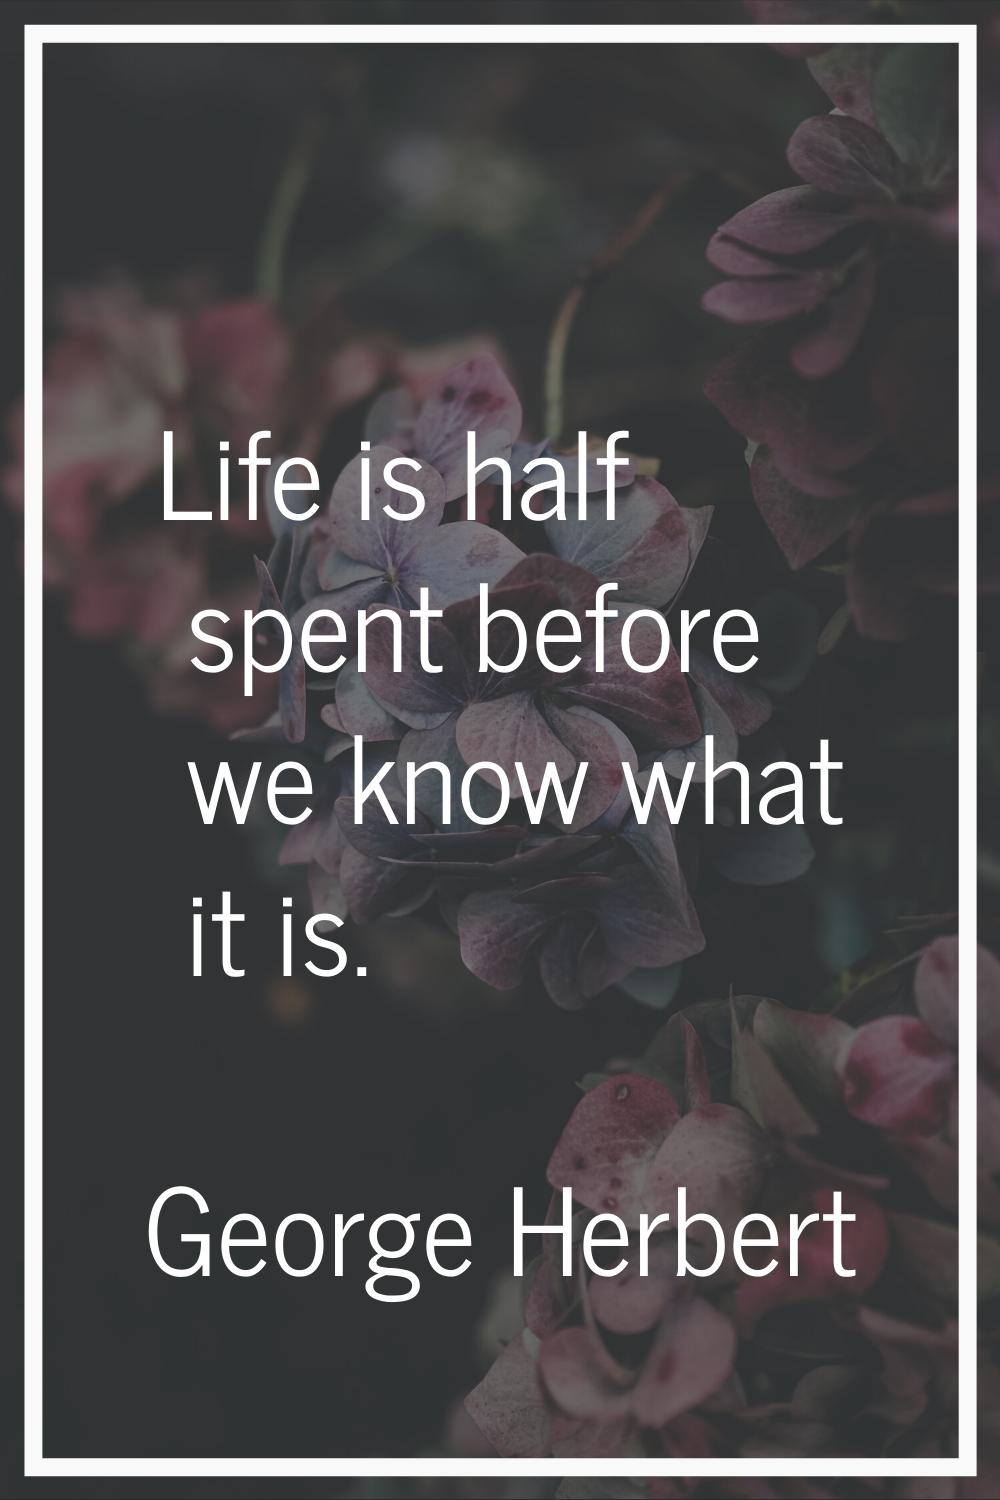 Life is half spent before we know what it is.